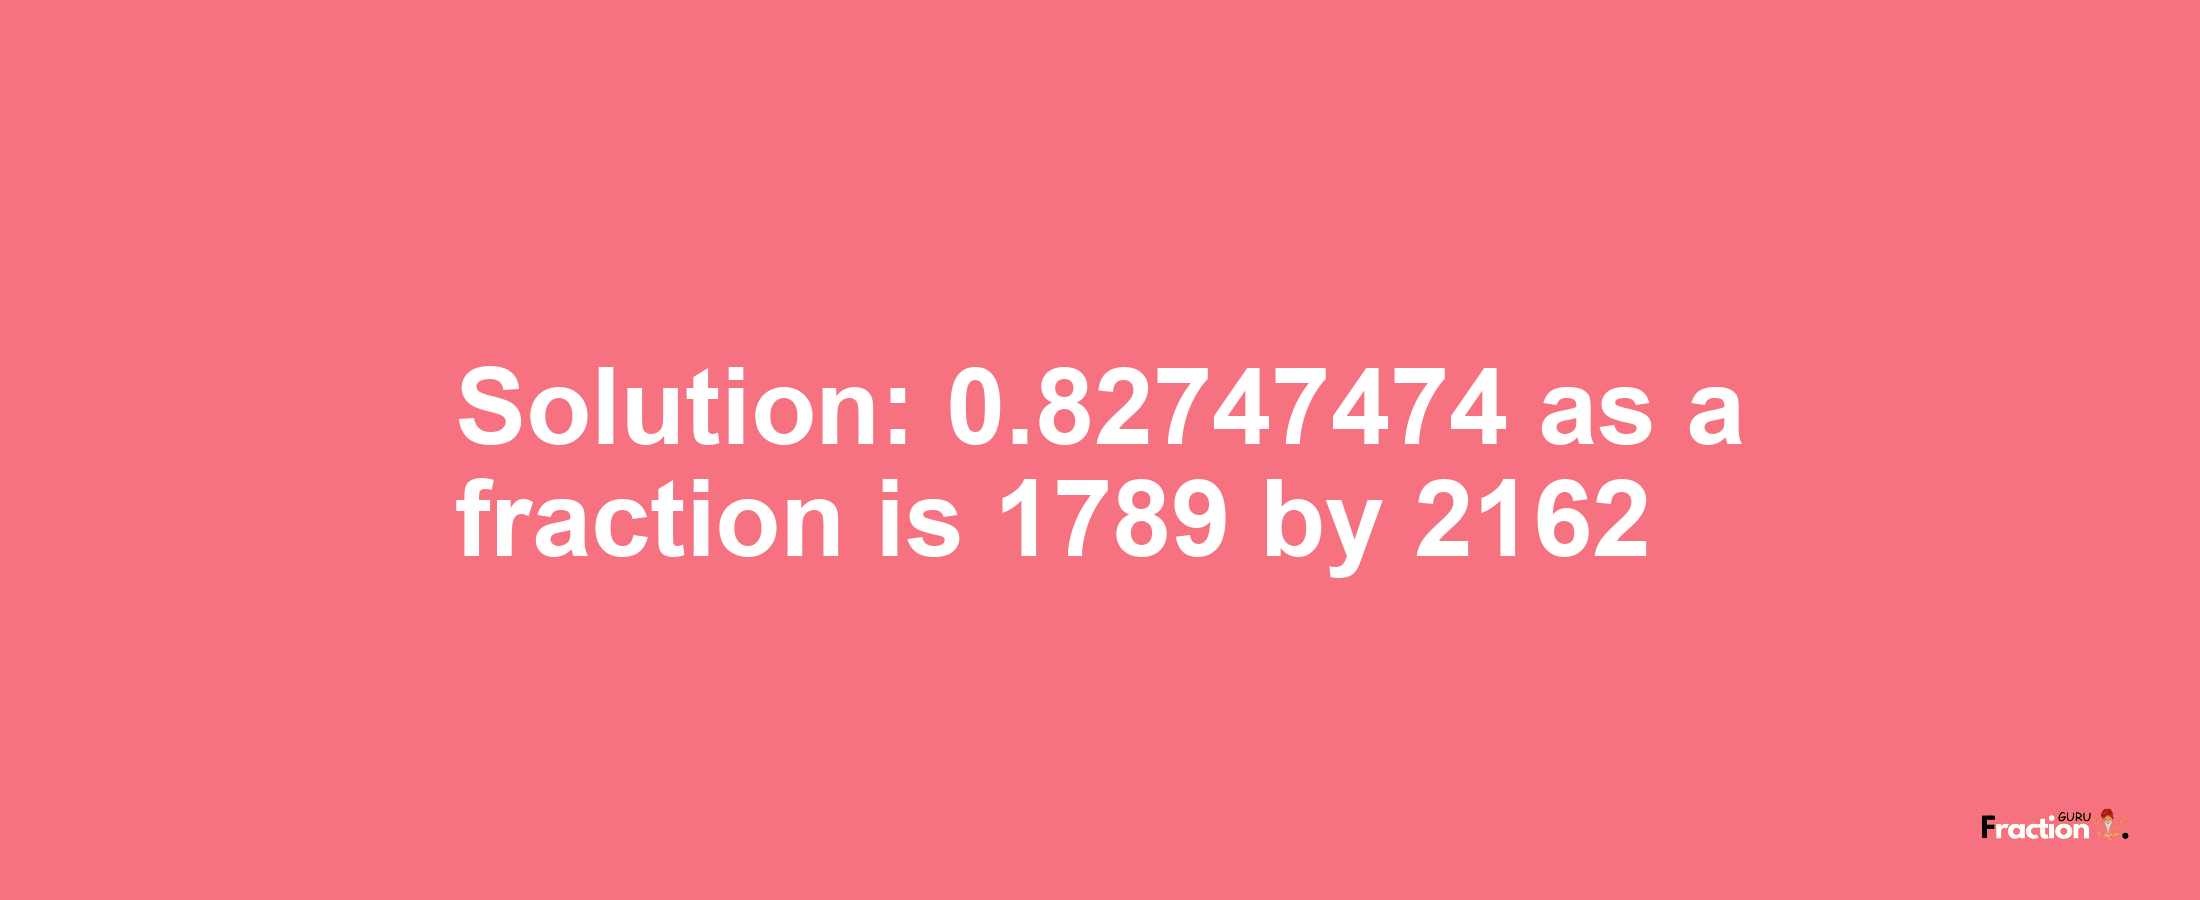 Solution:0.82747474 as a fraction is 1789/2162